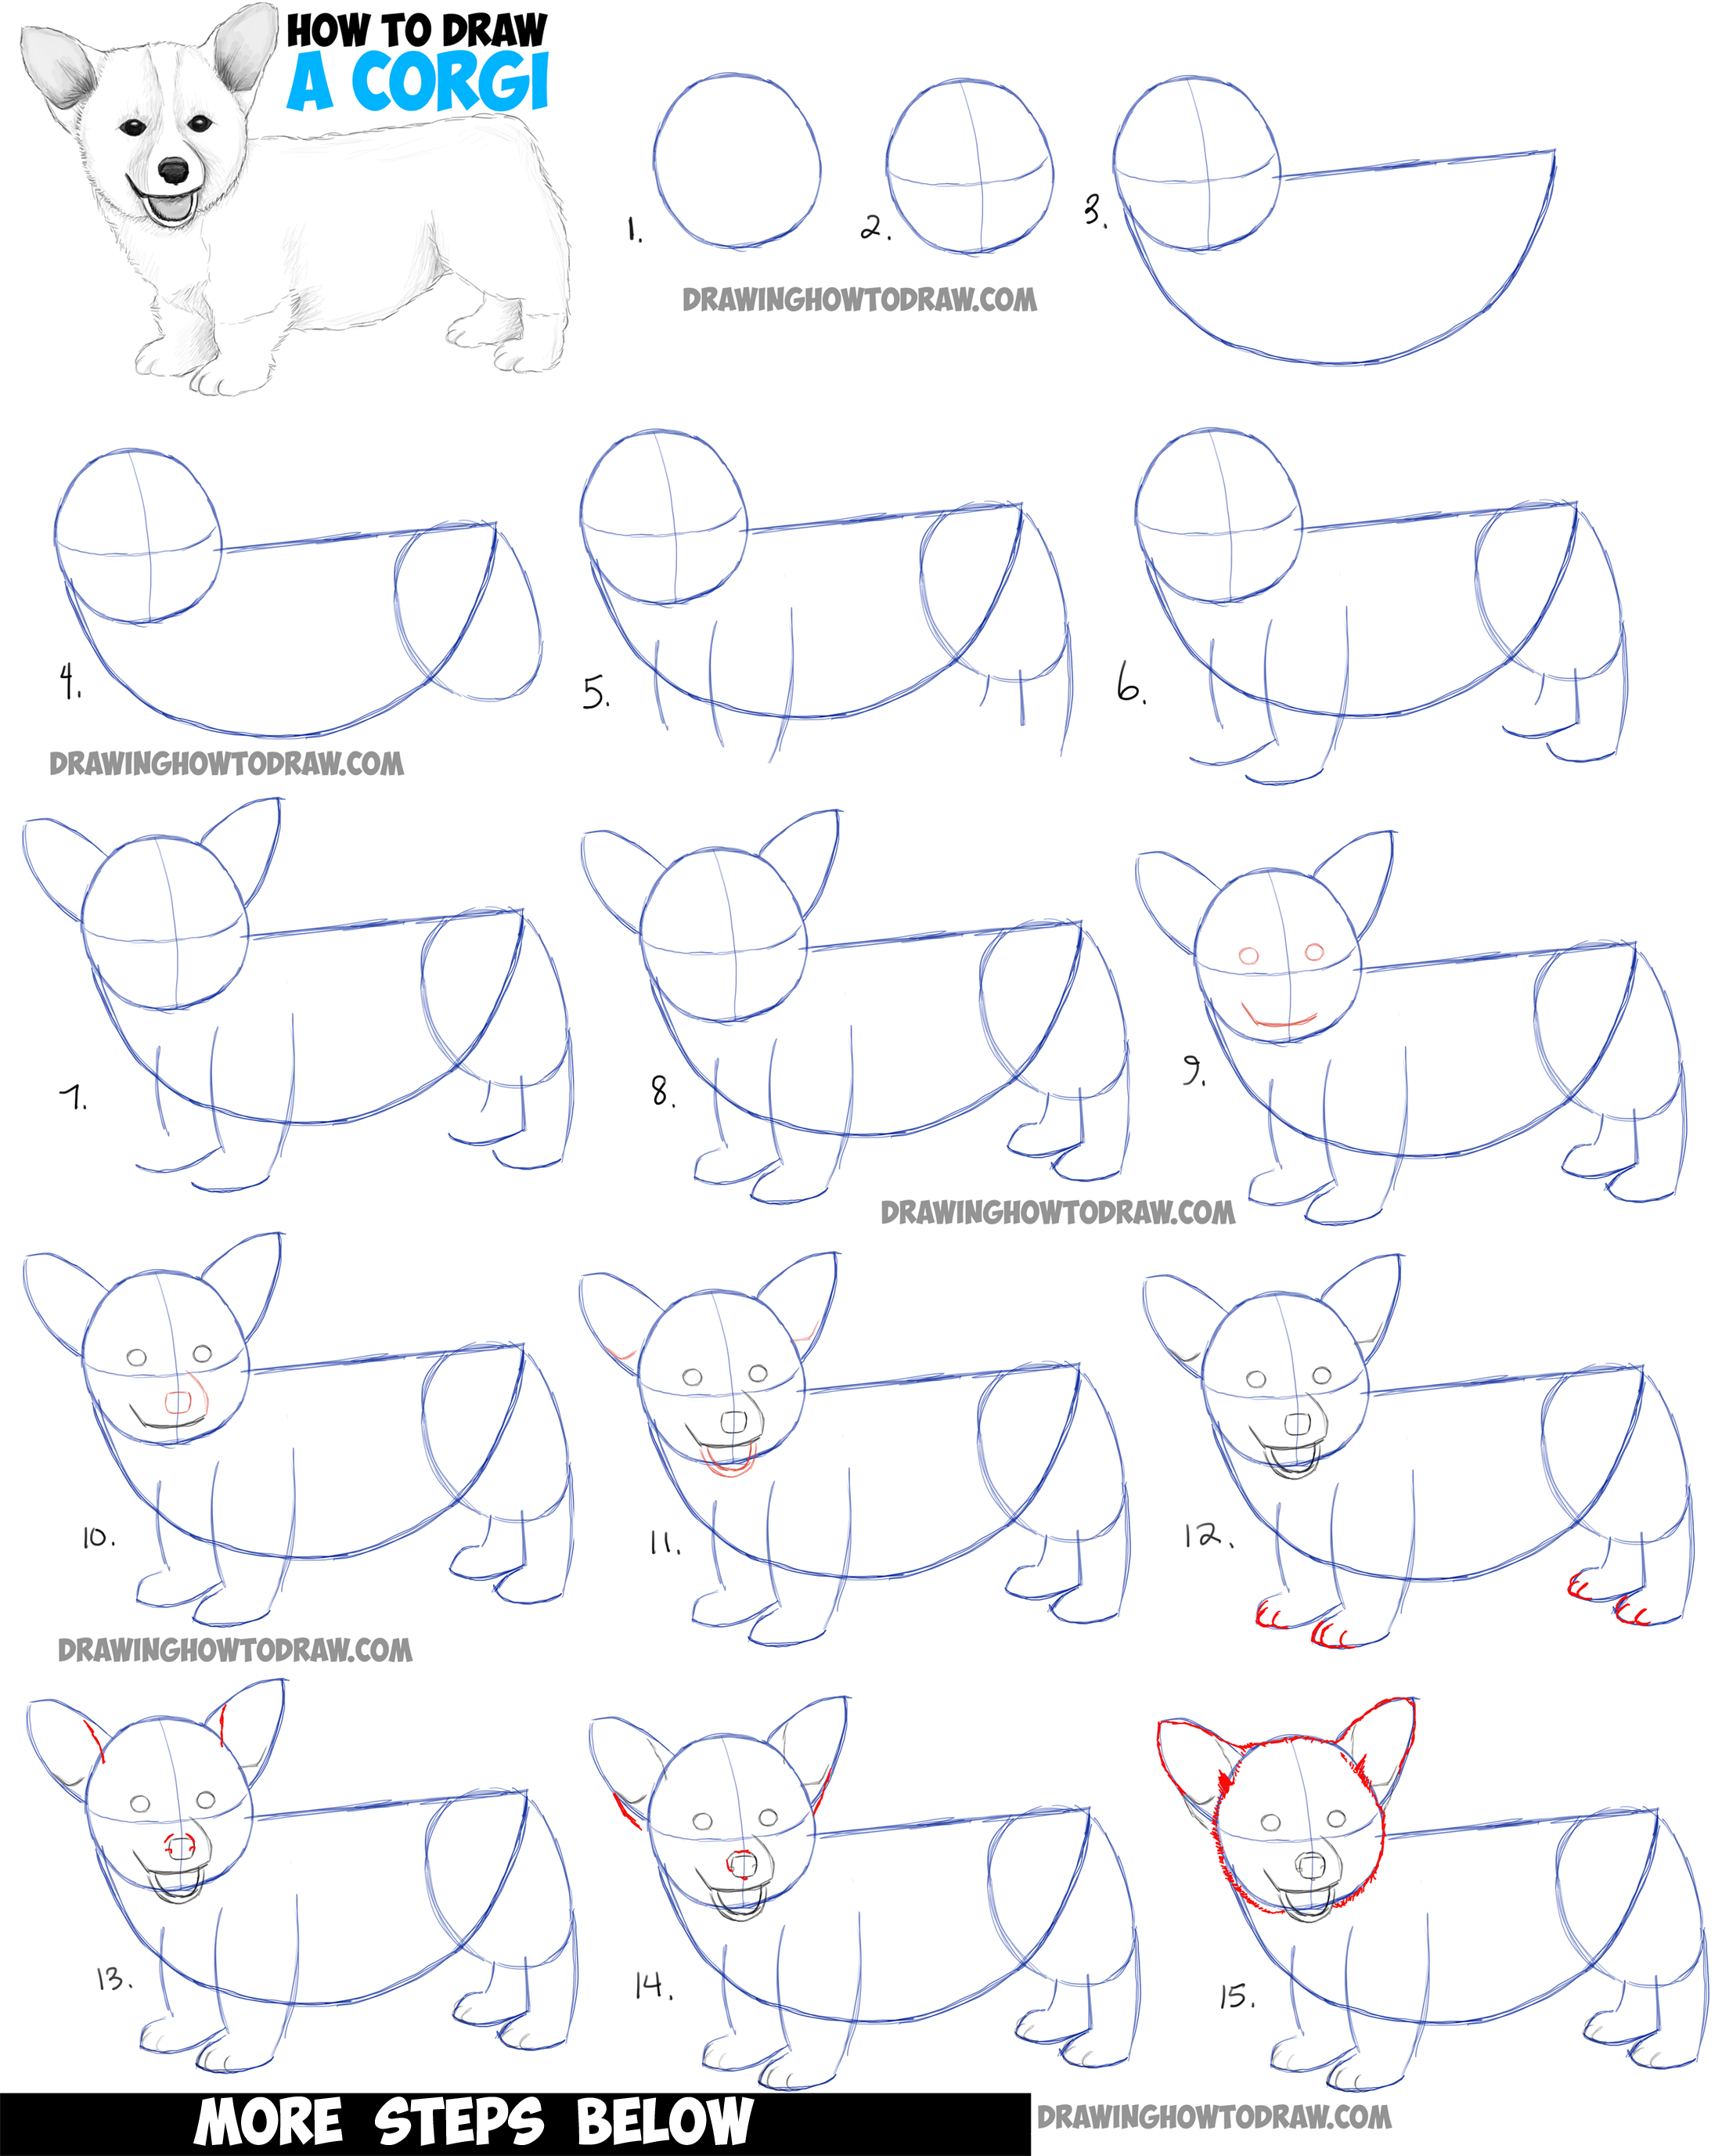 How to Draw a Corgi Puppy Easy Step by Step Realistic Drawing Tutorial for Beginners